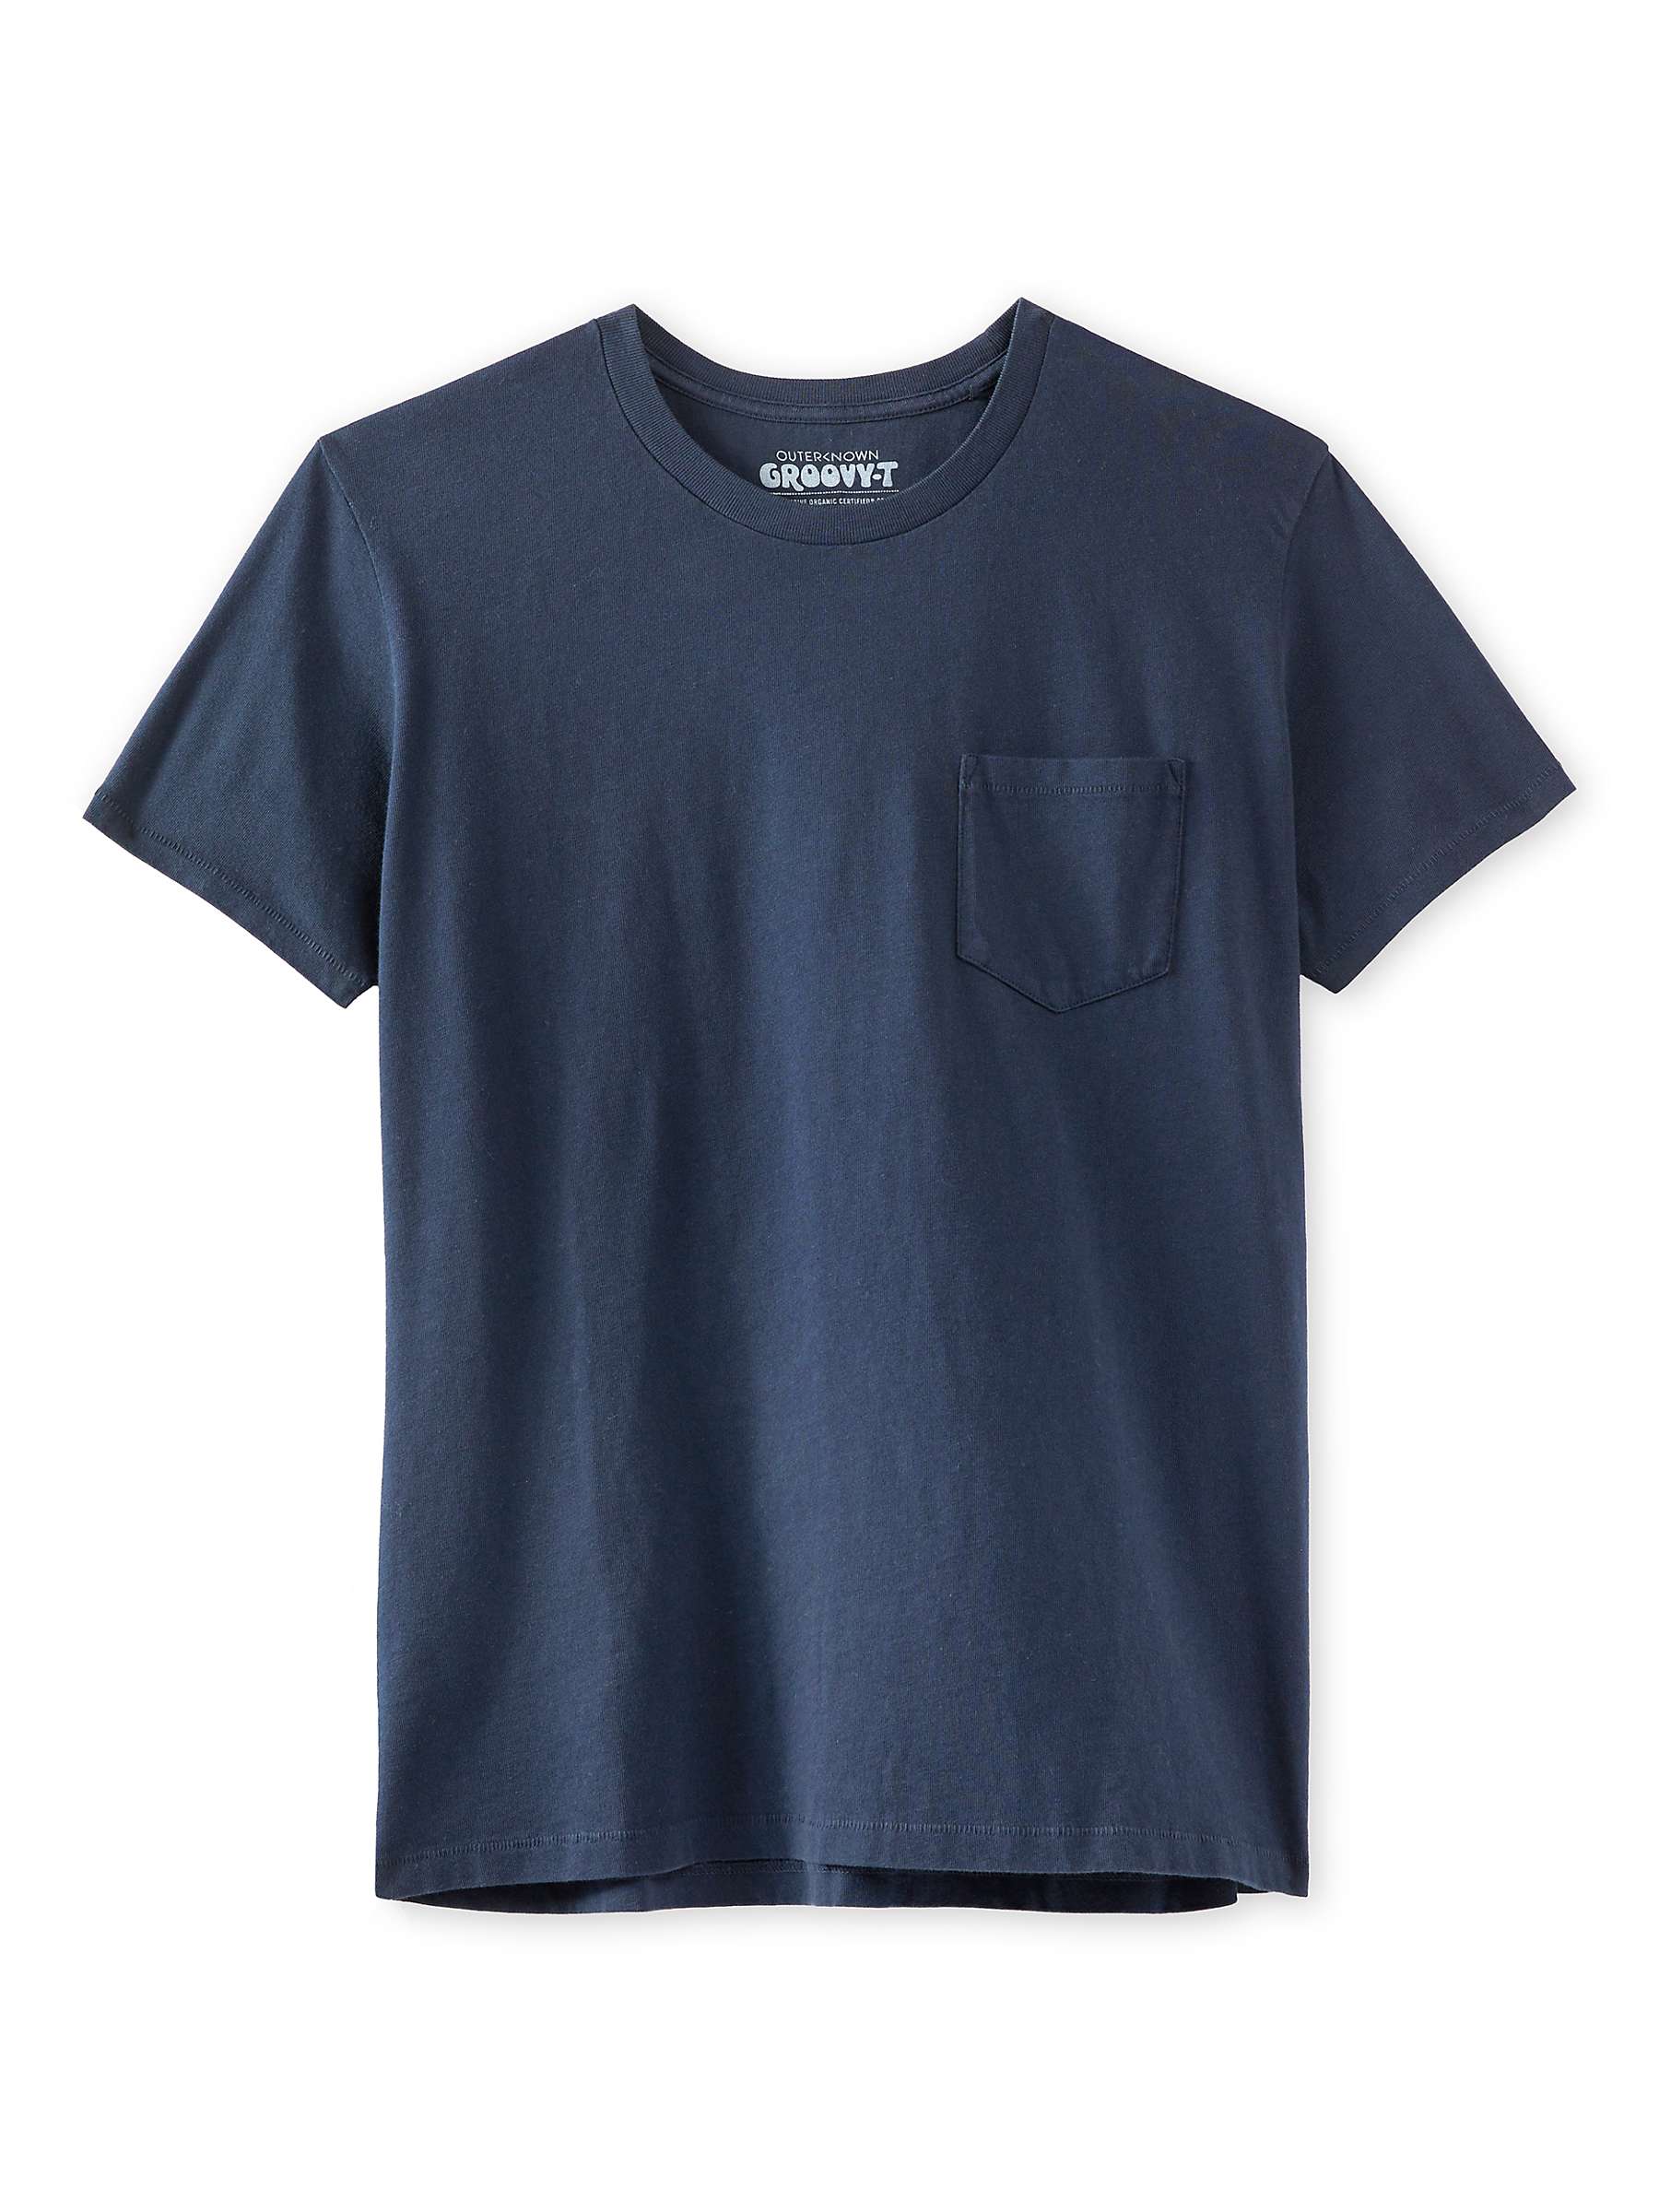 Buy Outerknown Groovy Pocket Short Sleeve T-Shirt Online at johnlewis.com